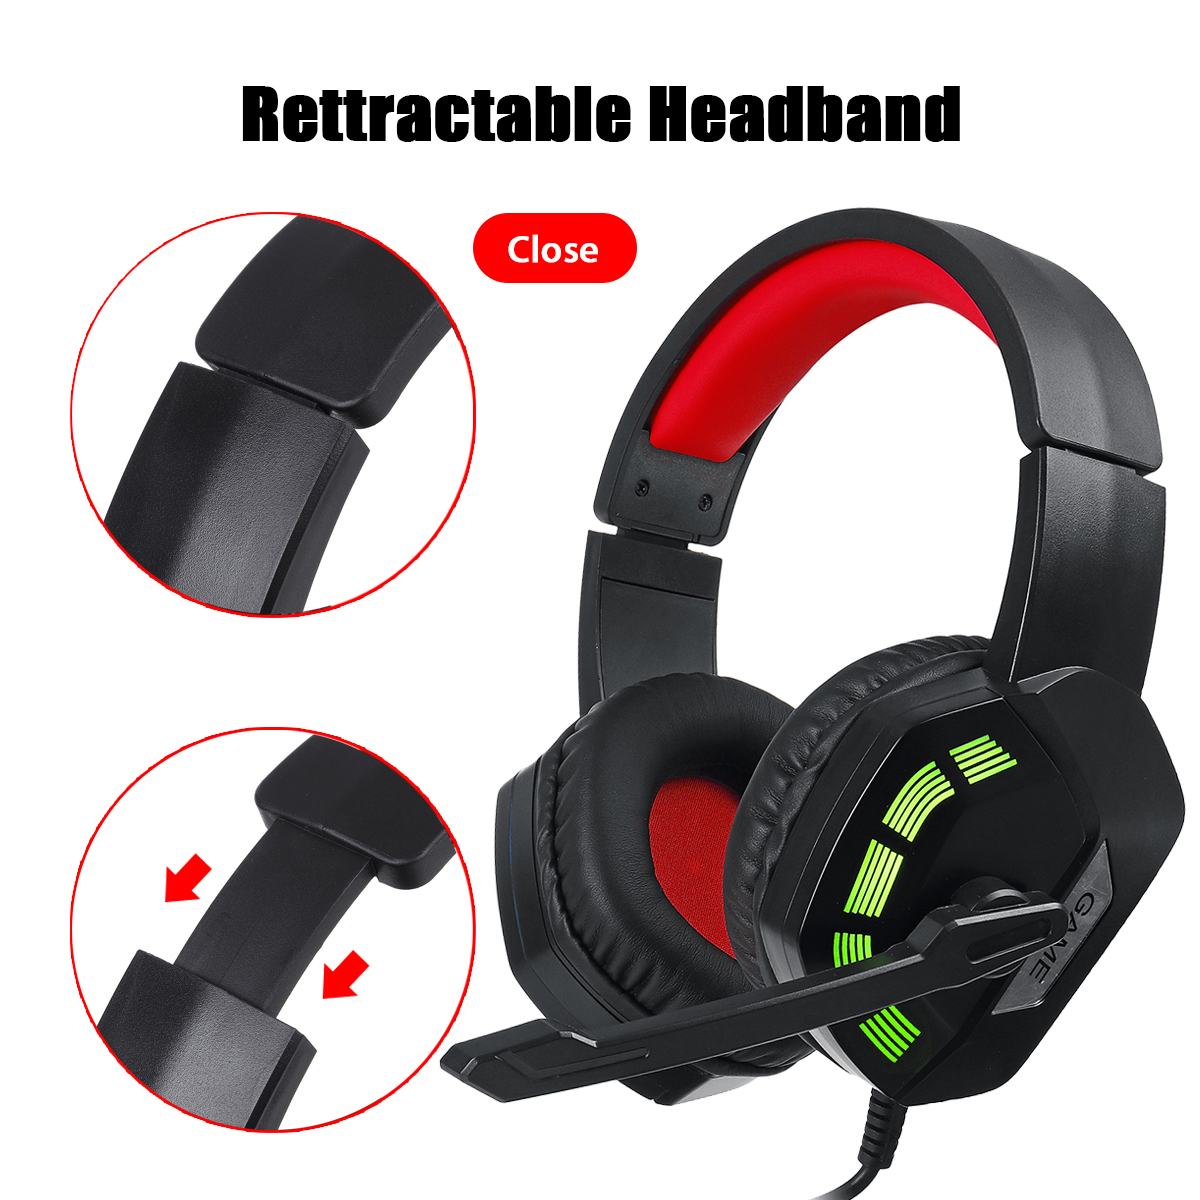 M1-Gaming-Headset-Surround-Sound-Music-Earphones-USB-71--35mm-Wired-RGB-Backlight-Game-Headphones-wi-1827492-13